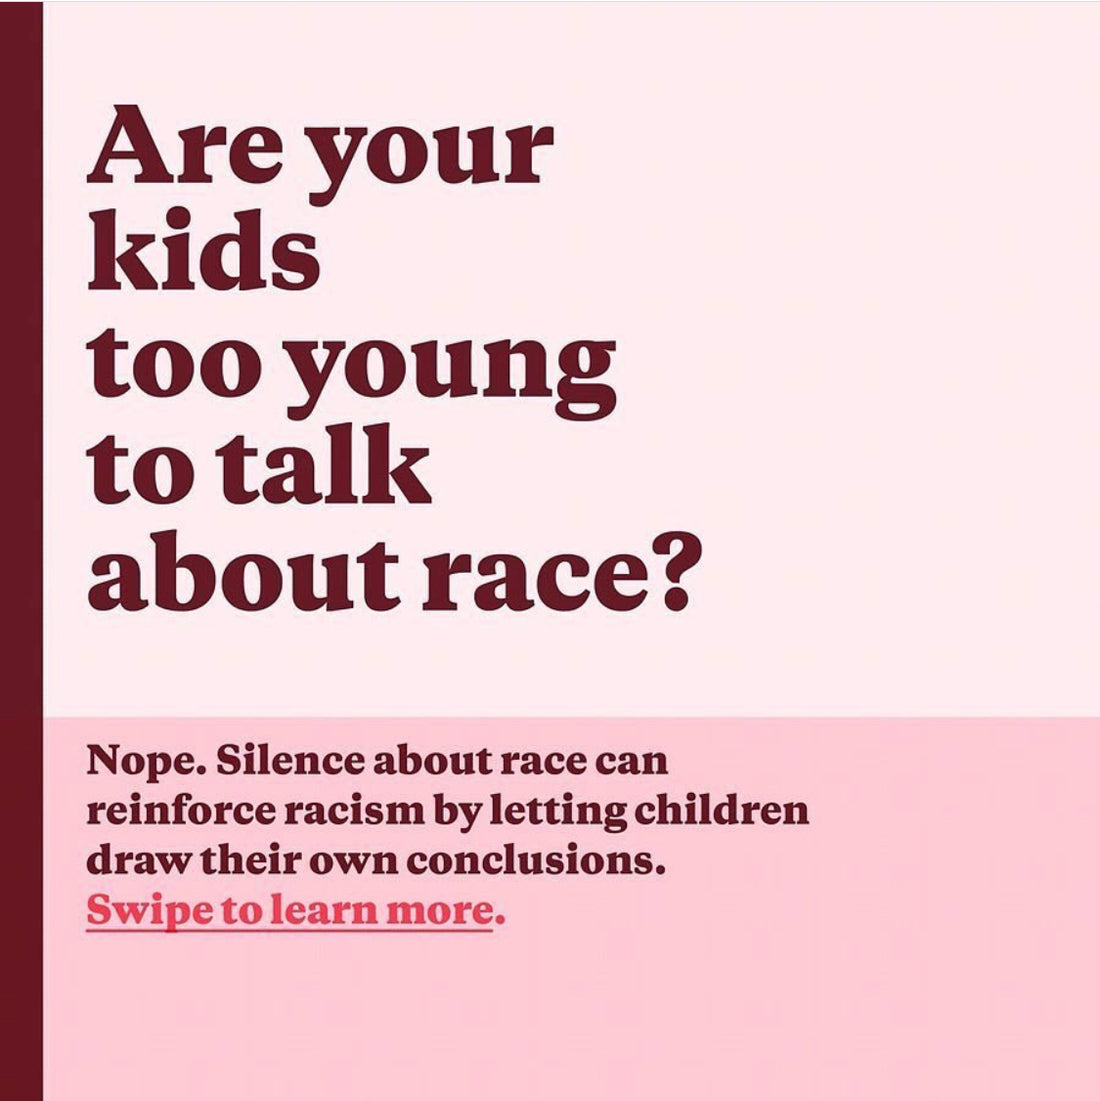 ARE YOUR KIDS TOO YOUNG TO TALK ABOUT RACE?